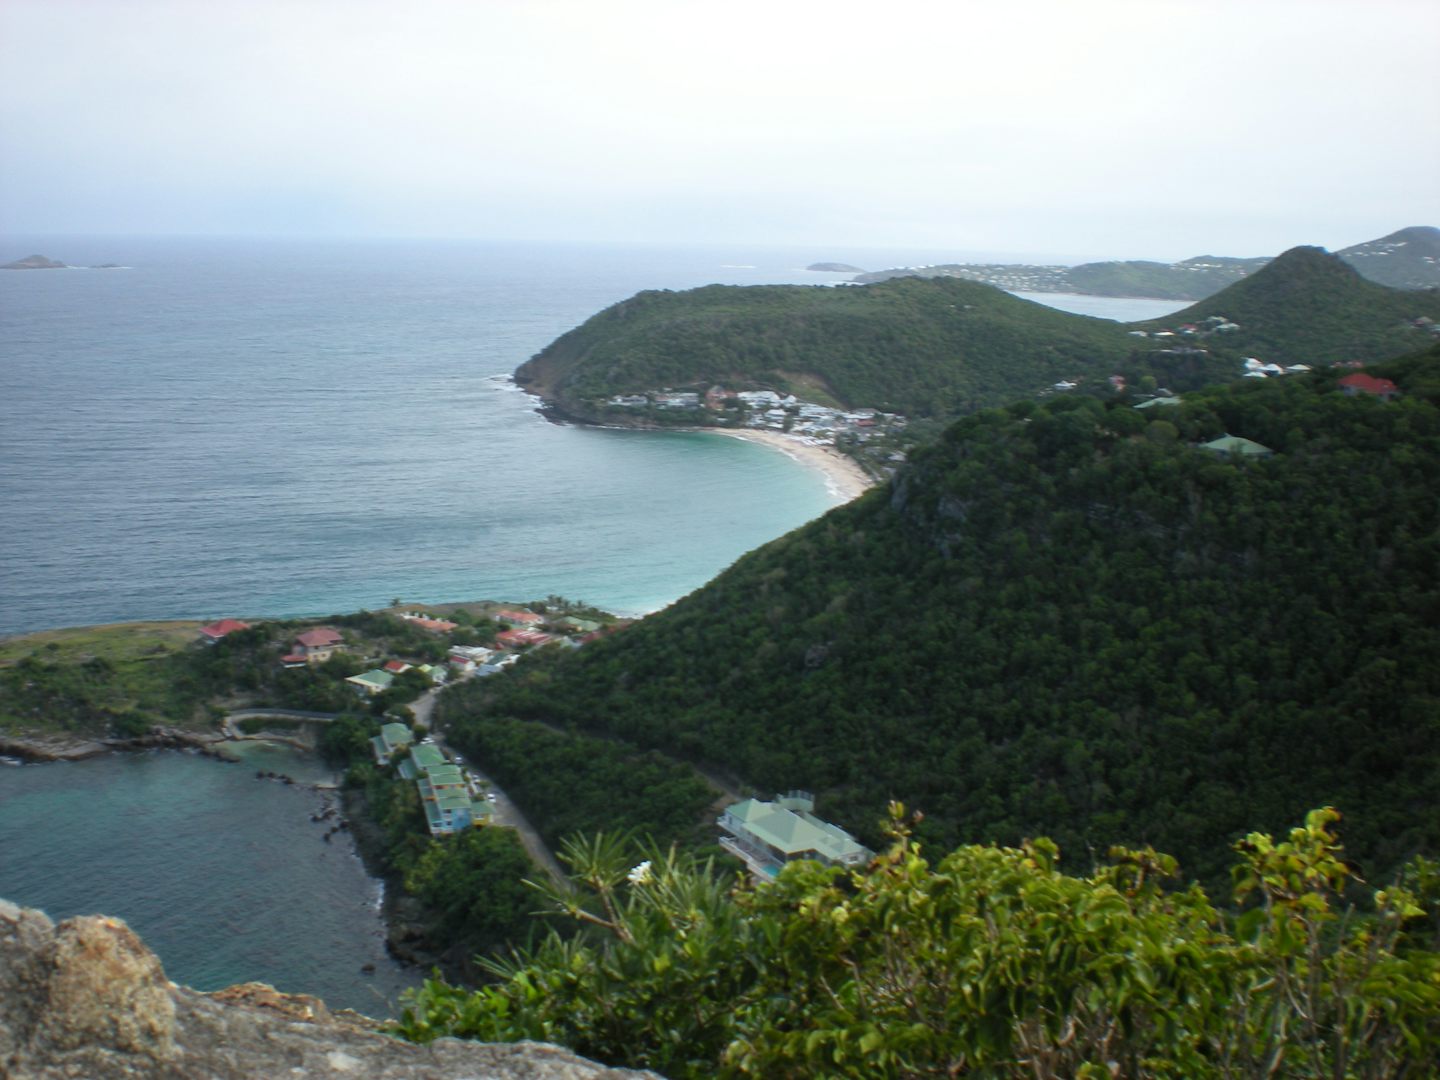 View from a mountaintop in St. Barths.